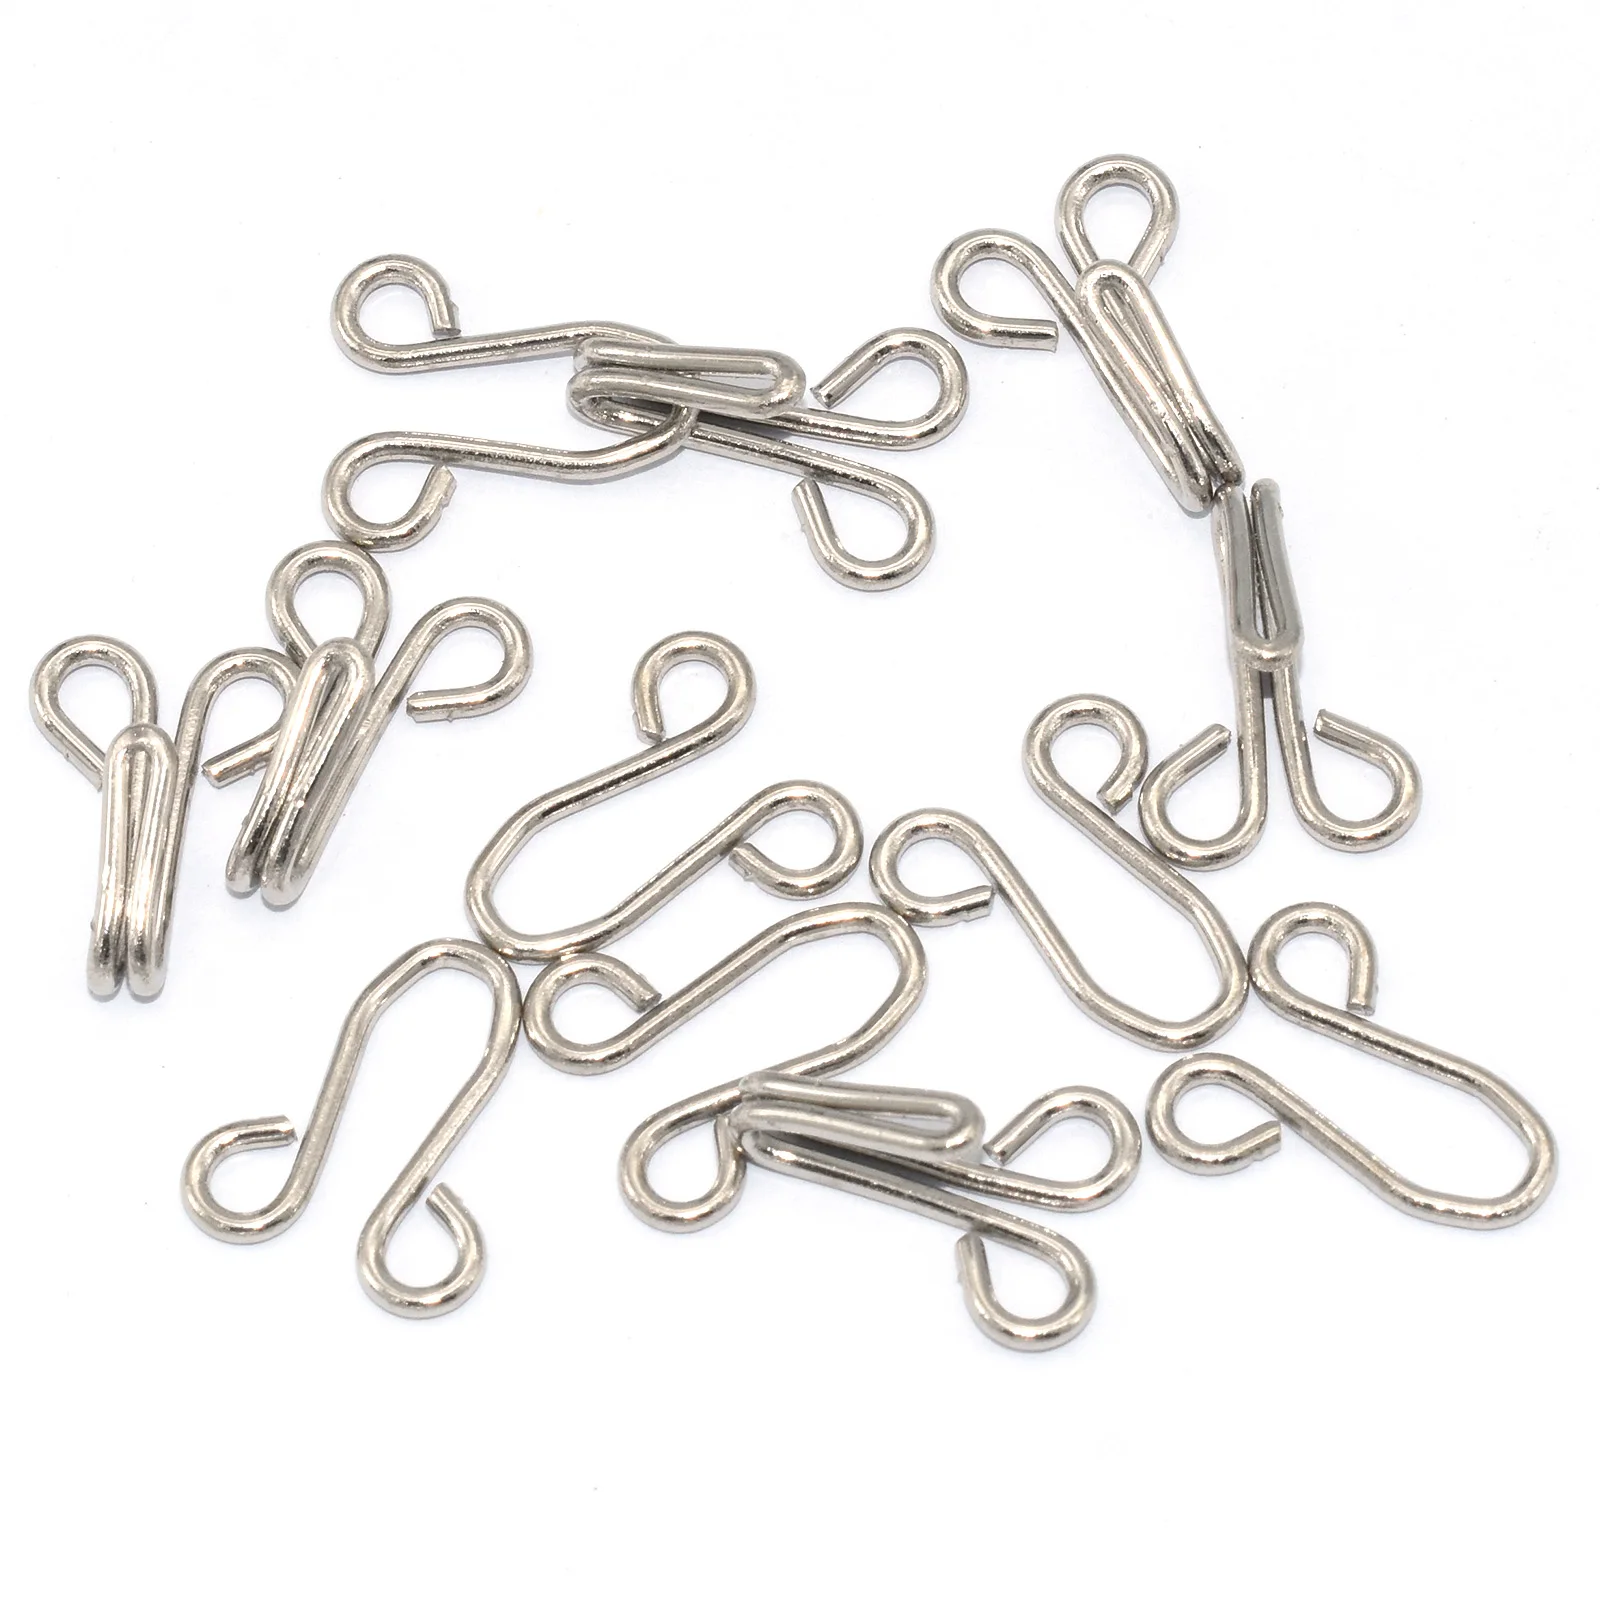 No Sew) Swimsuit Bra Hooks Replacement, Inch, Metal, Pin Hooks by Pin Straps  (2)